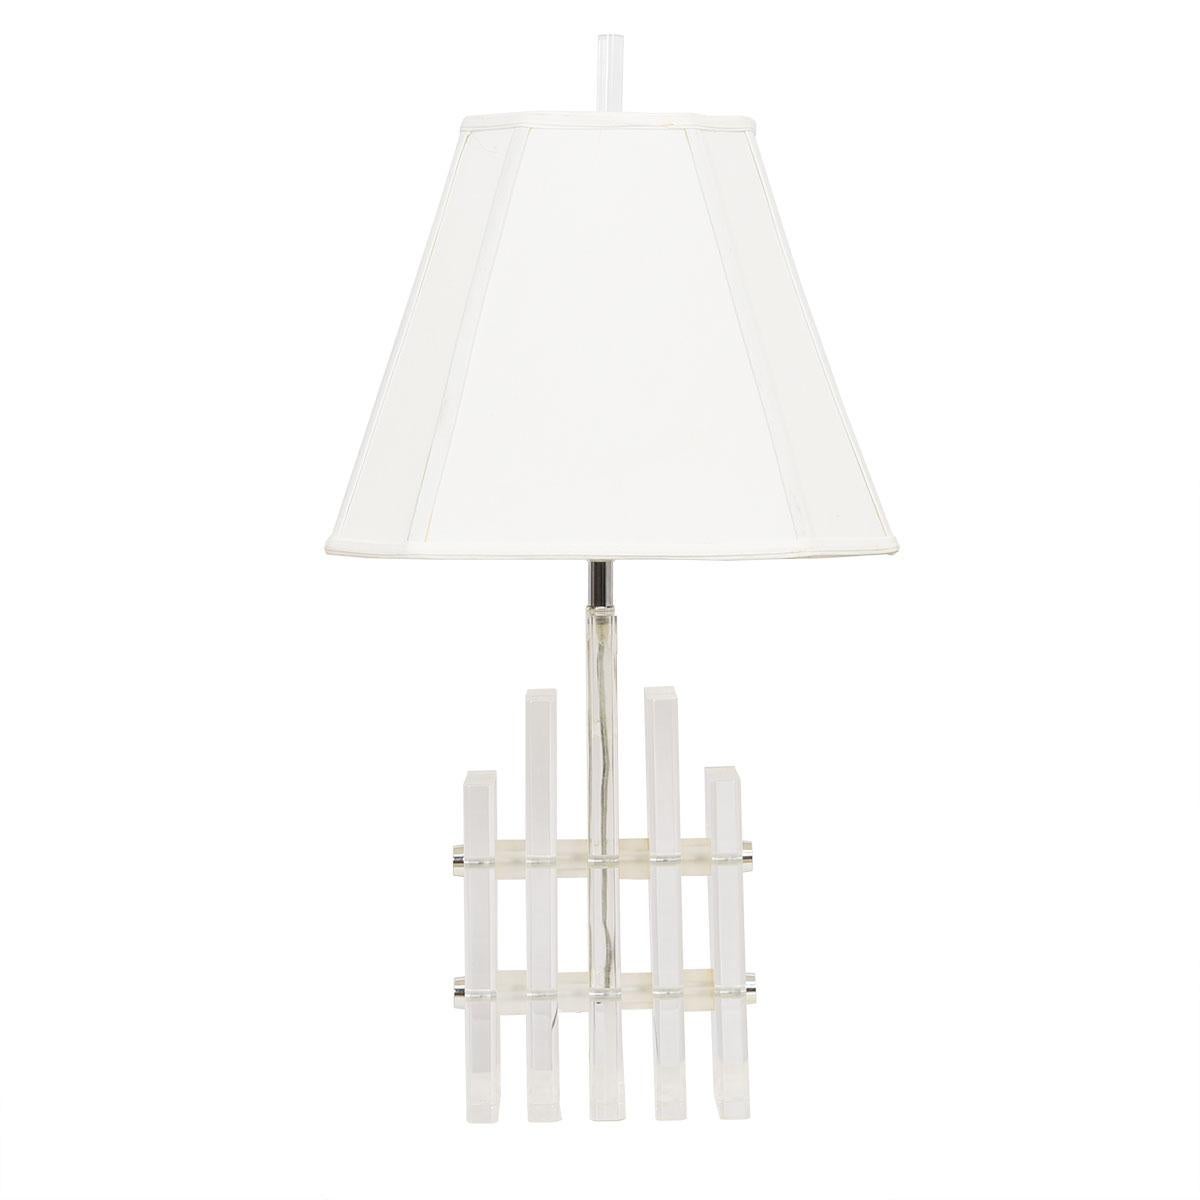 MCM Lucite Table Lamp

Additional information:
Material: Lucite
Featured at Kensington.
Staggered bars of lucite form a building shape base on this mod table lamp.

Dimension: W 8.25? x D 4? x H 17?